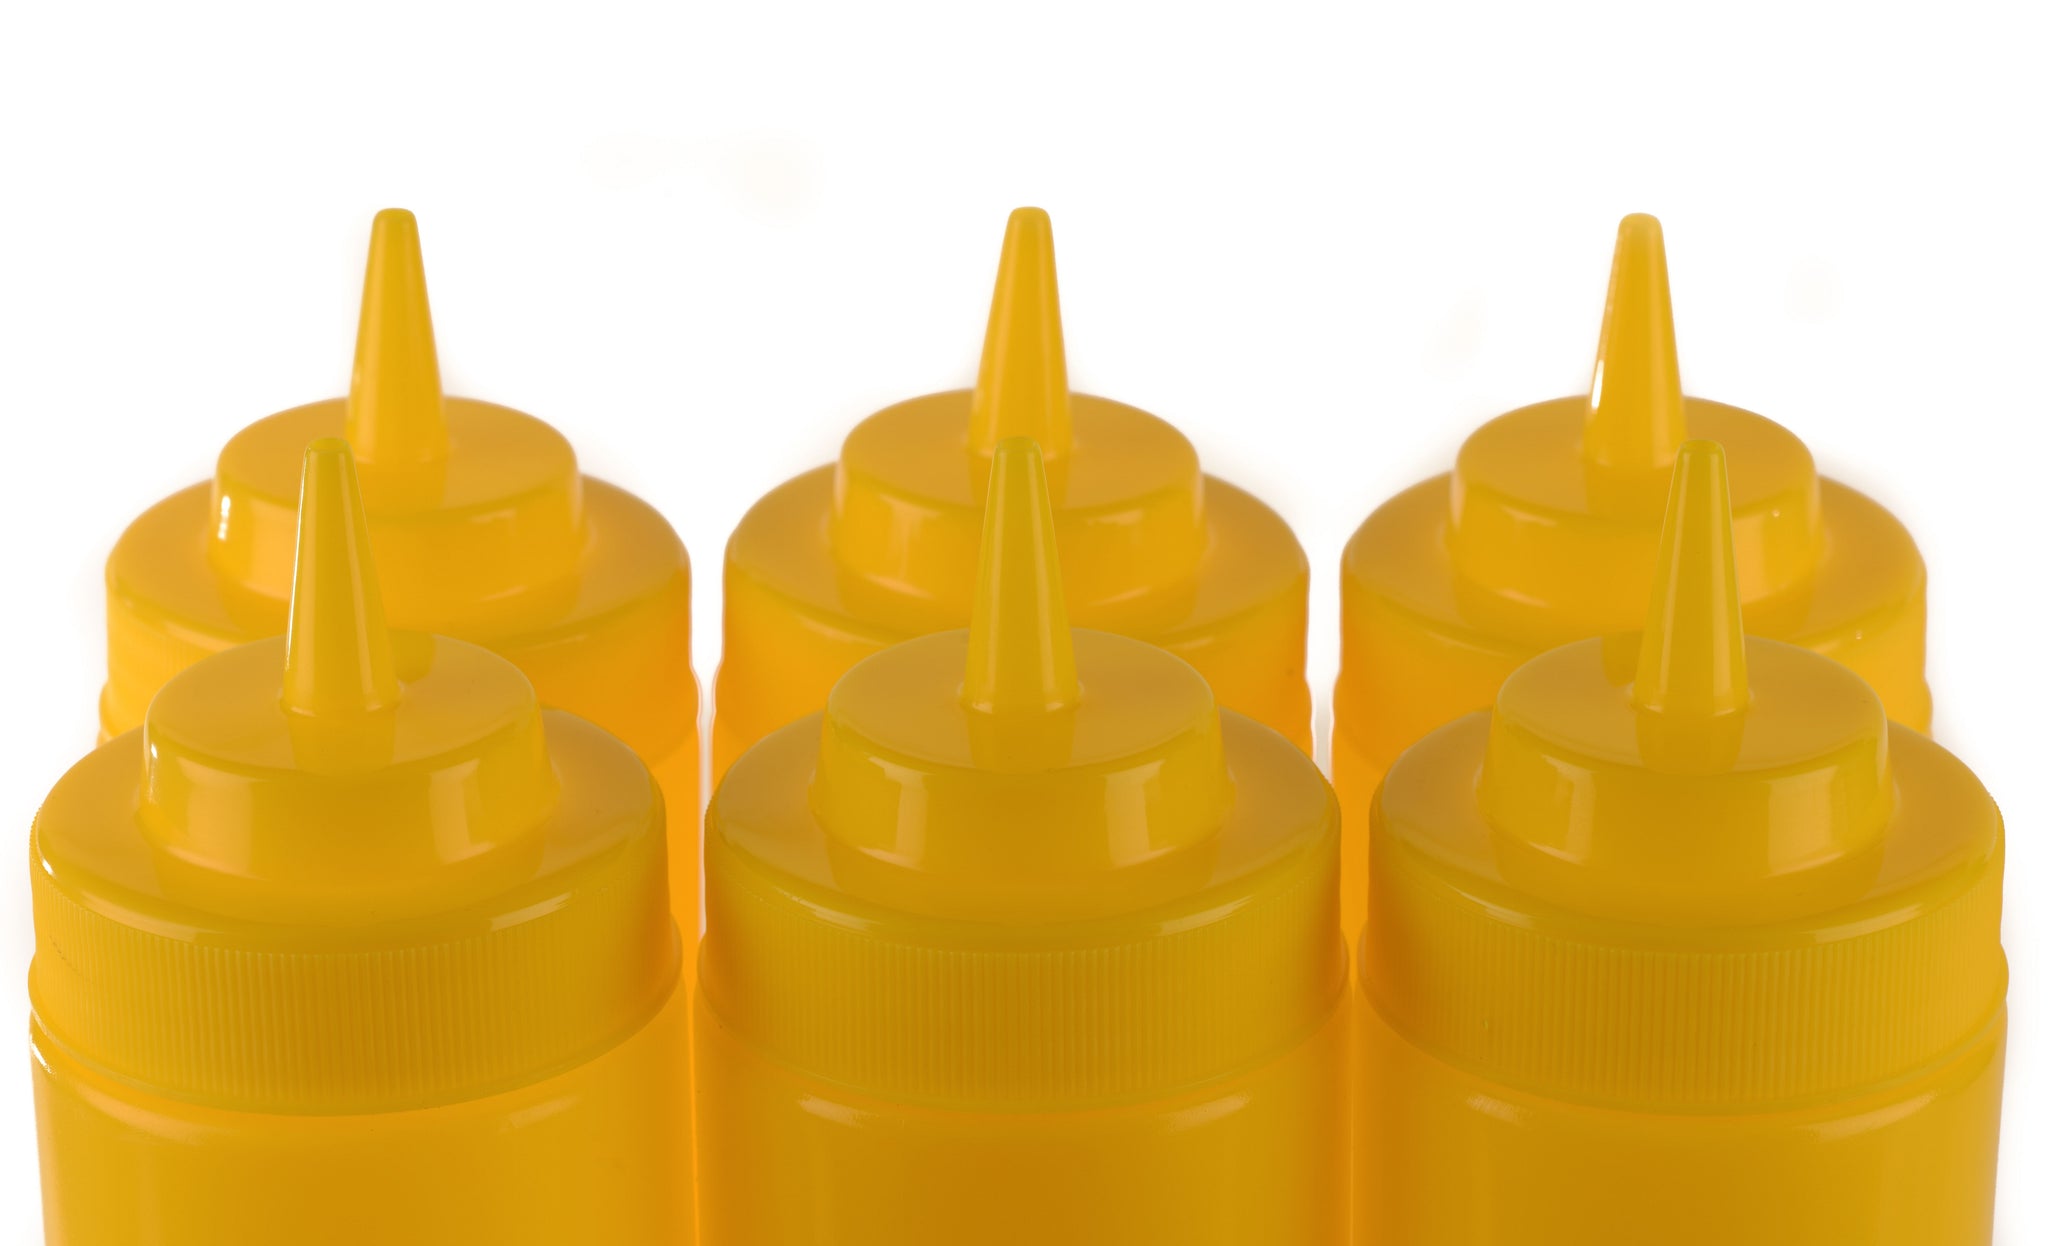 24 Oz Yellow Plastic Condiment Squeeze Bottles Squirt Bottle for Sauces, Dressing, Arts and Crafts, Ketchup, Mustard, Oil, BBQ - Reusable